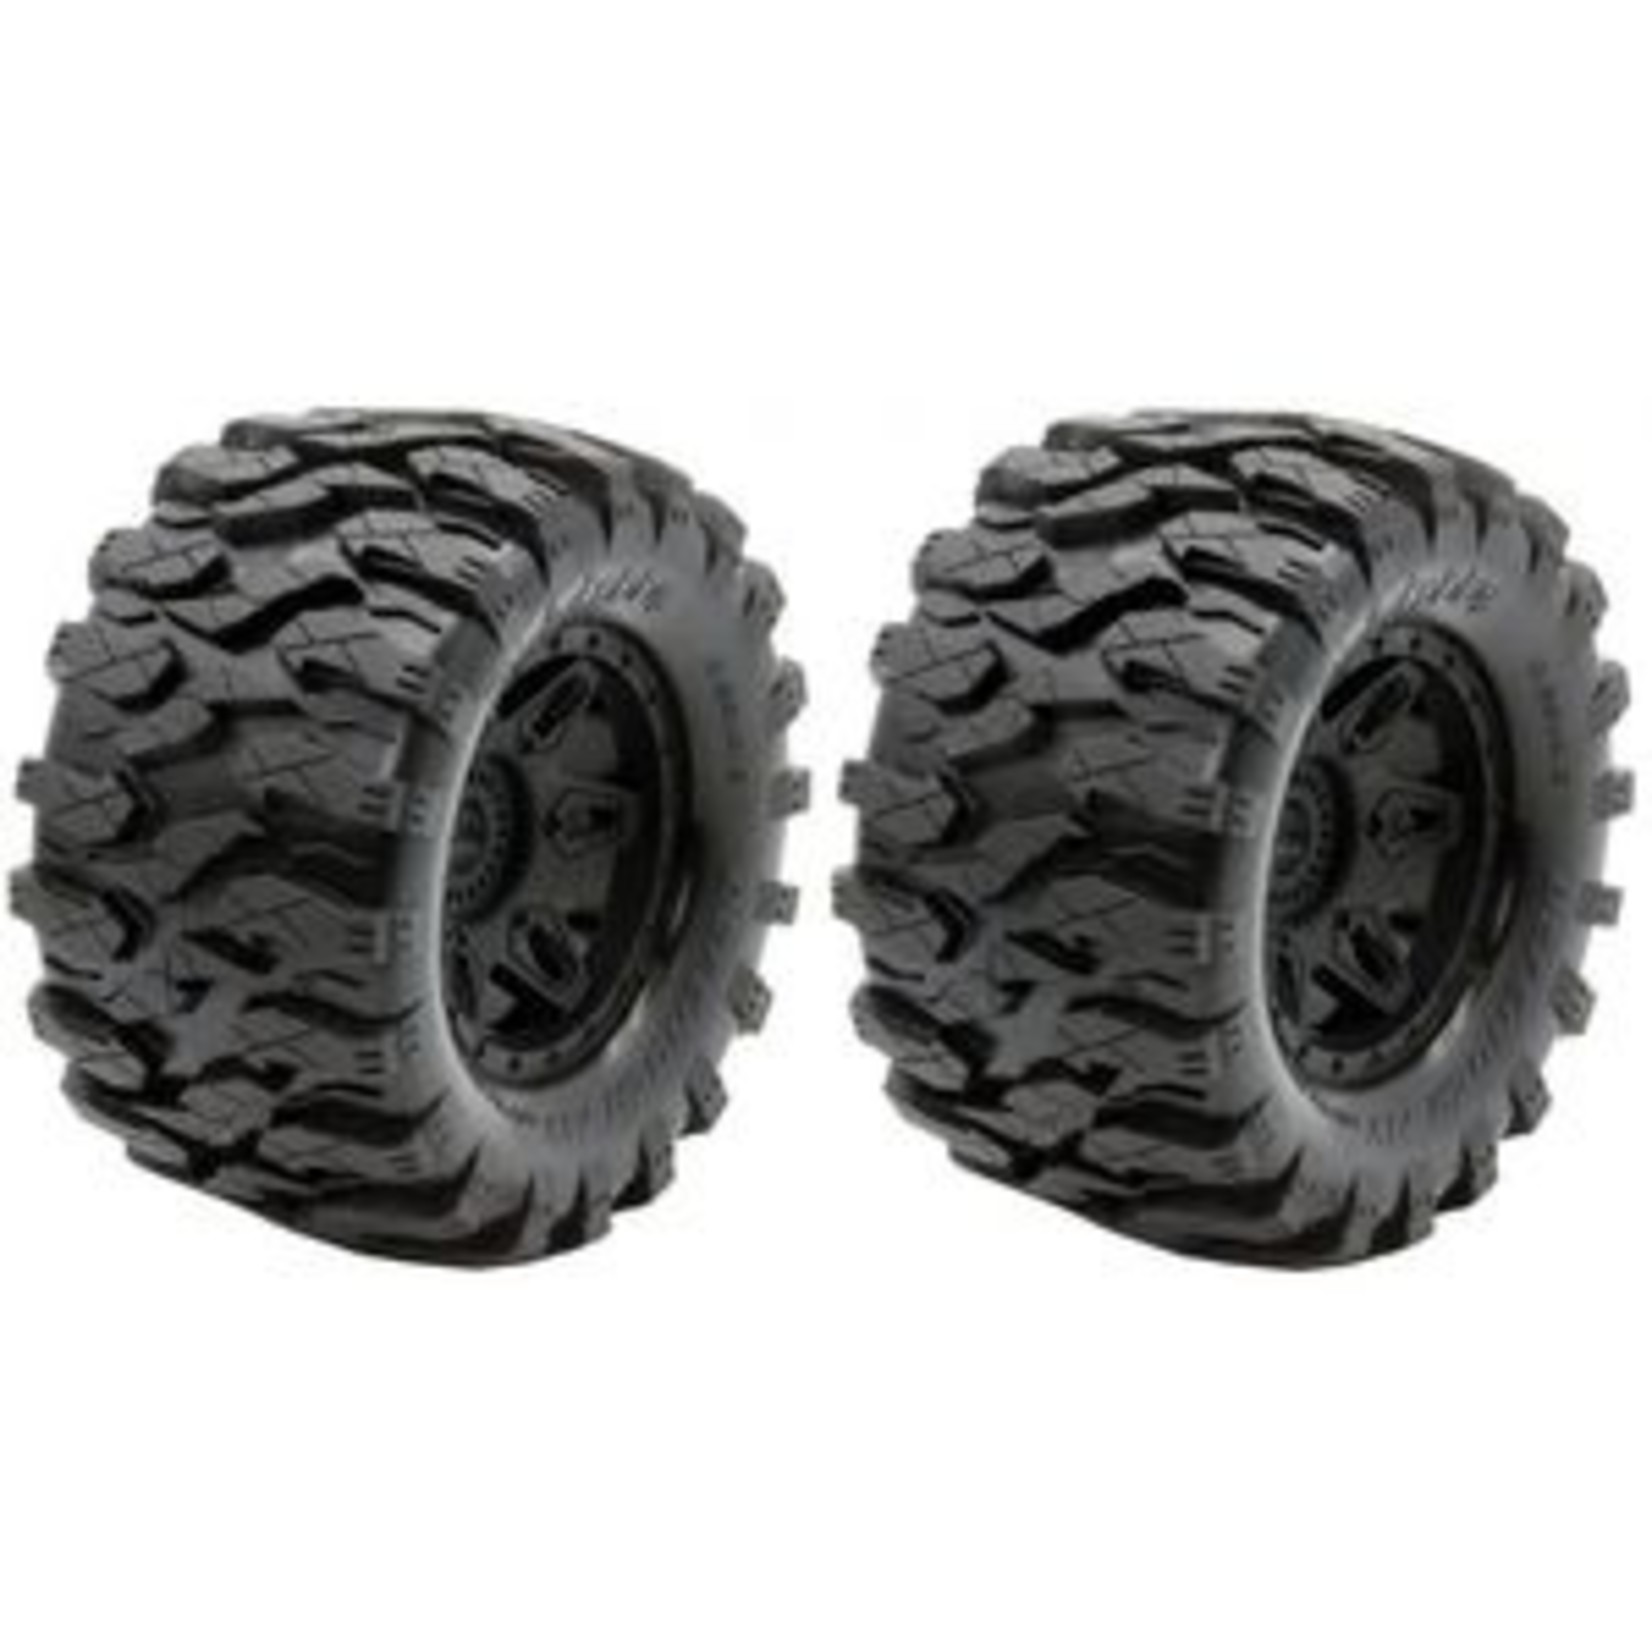 Power Hobby PHBPHT2383 Defender MX Belted All Terrain Tires Mounted 17mm Traxxas